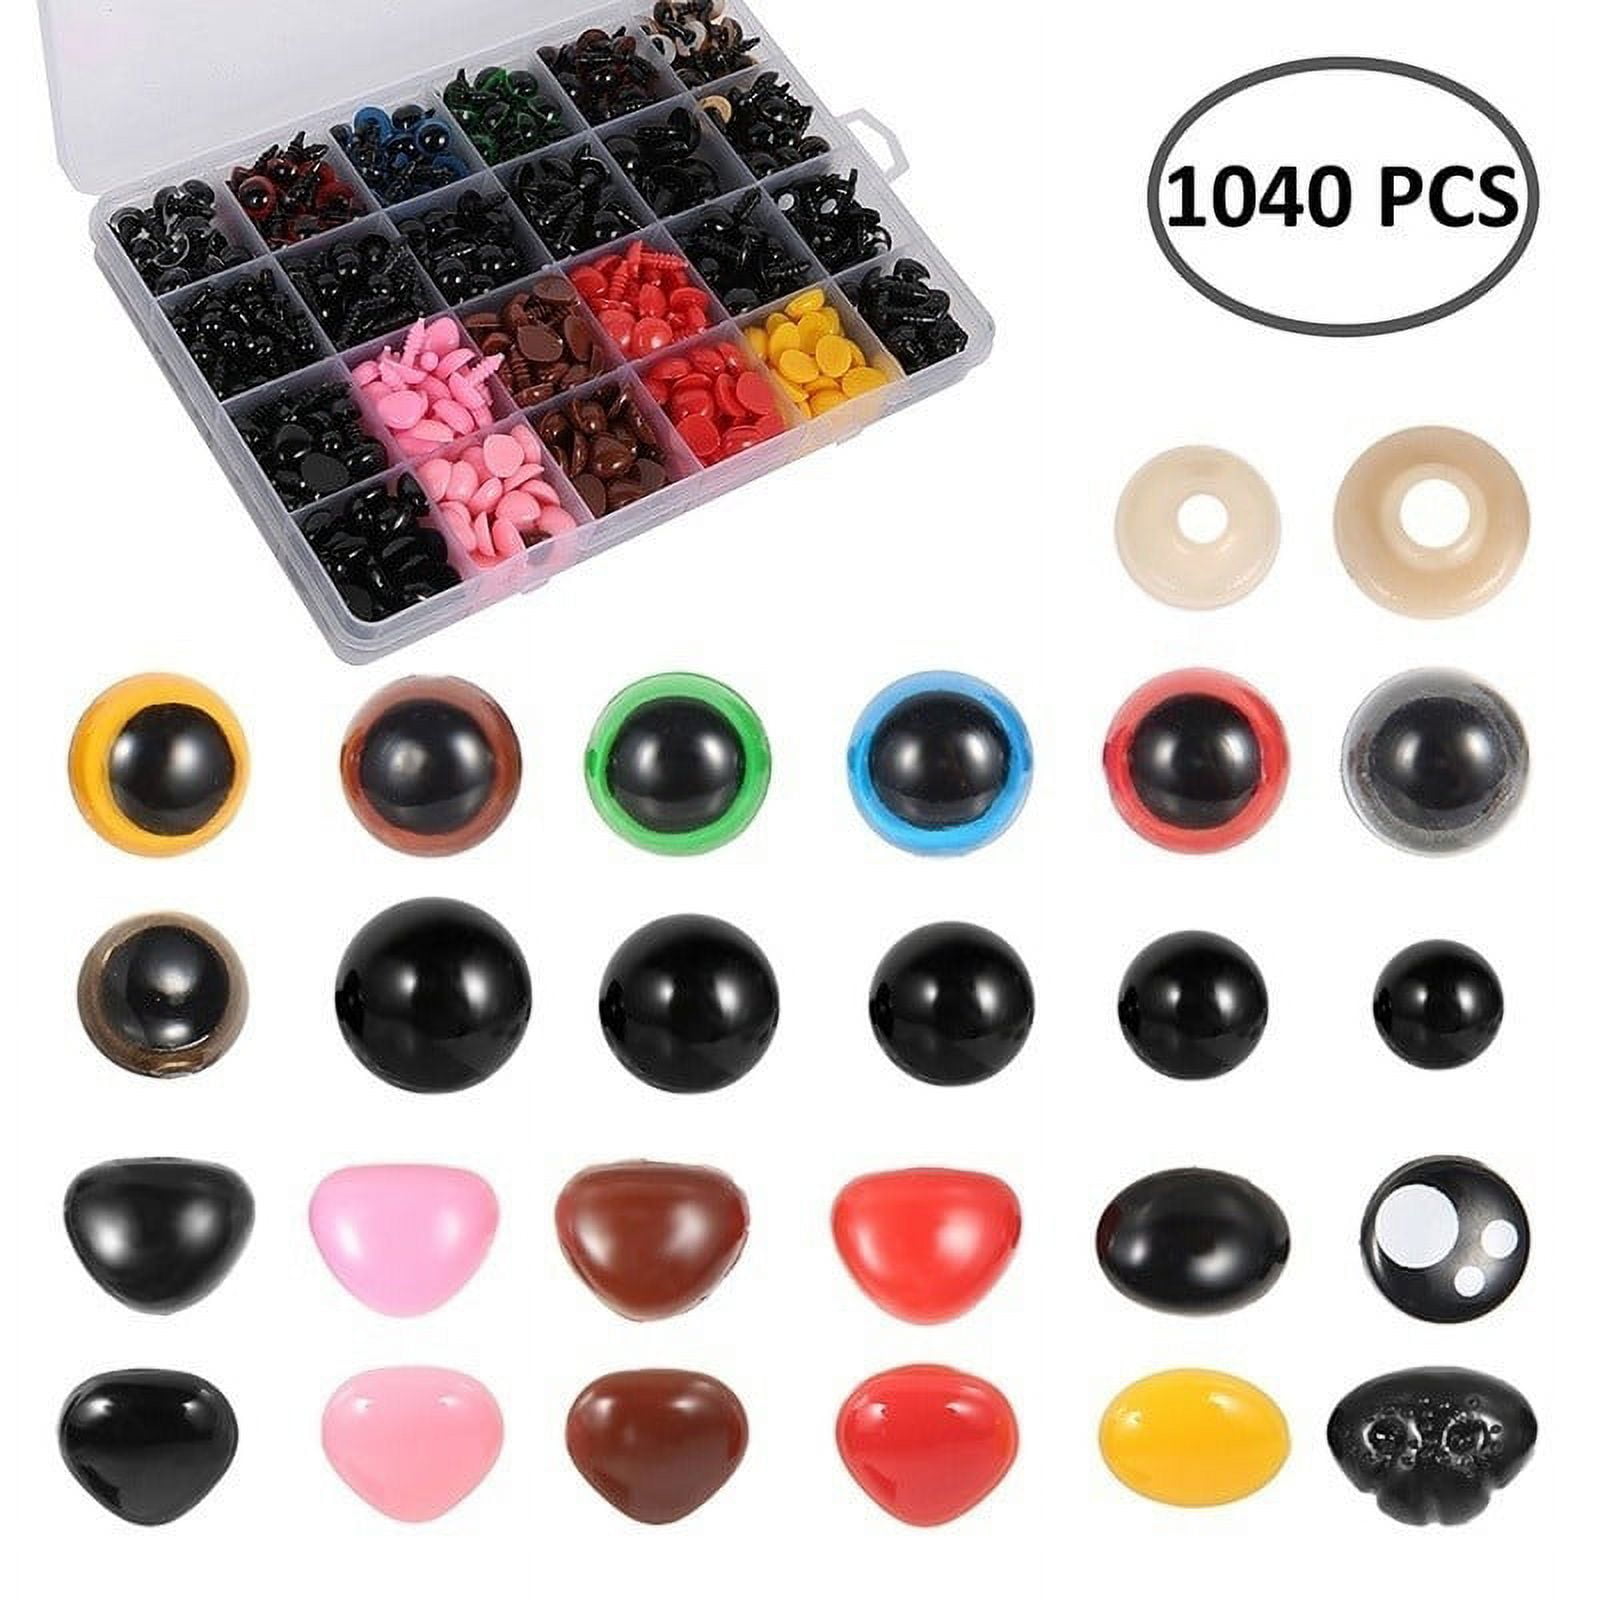 1040/752/150 PCS Colorful/Black Plastic Safety Eyes and Noses with Washers  Assorted Sizes for Doll, Puppet, Teddy Bear, Plush Animal 